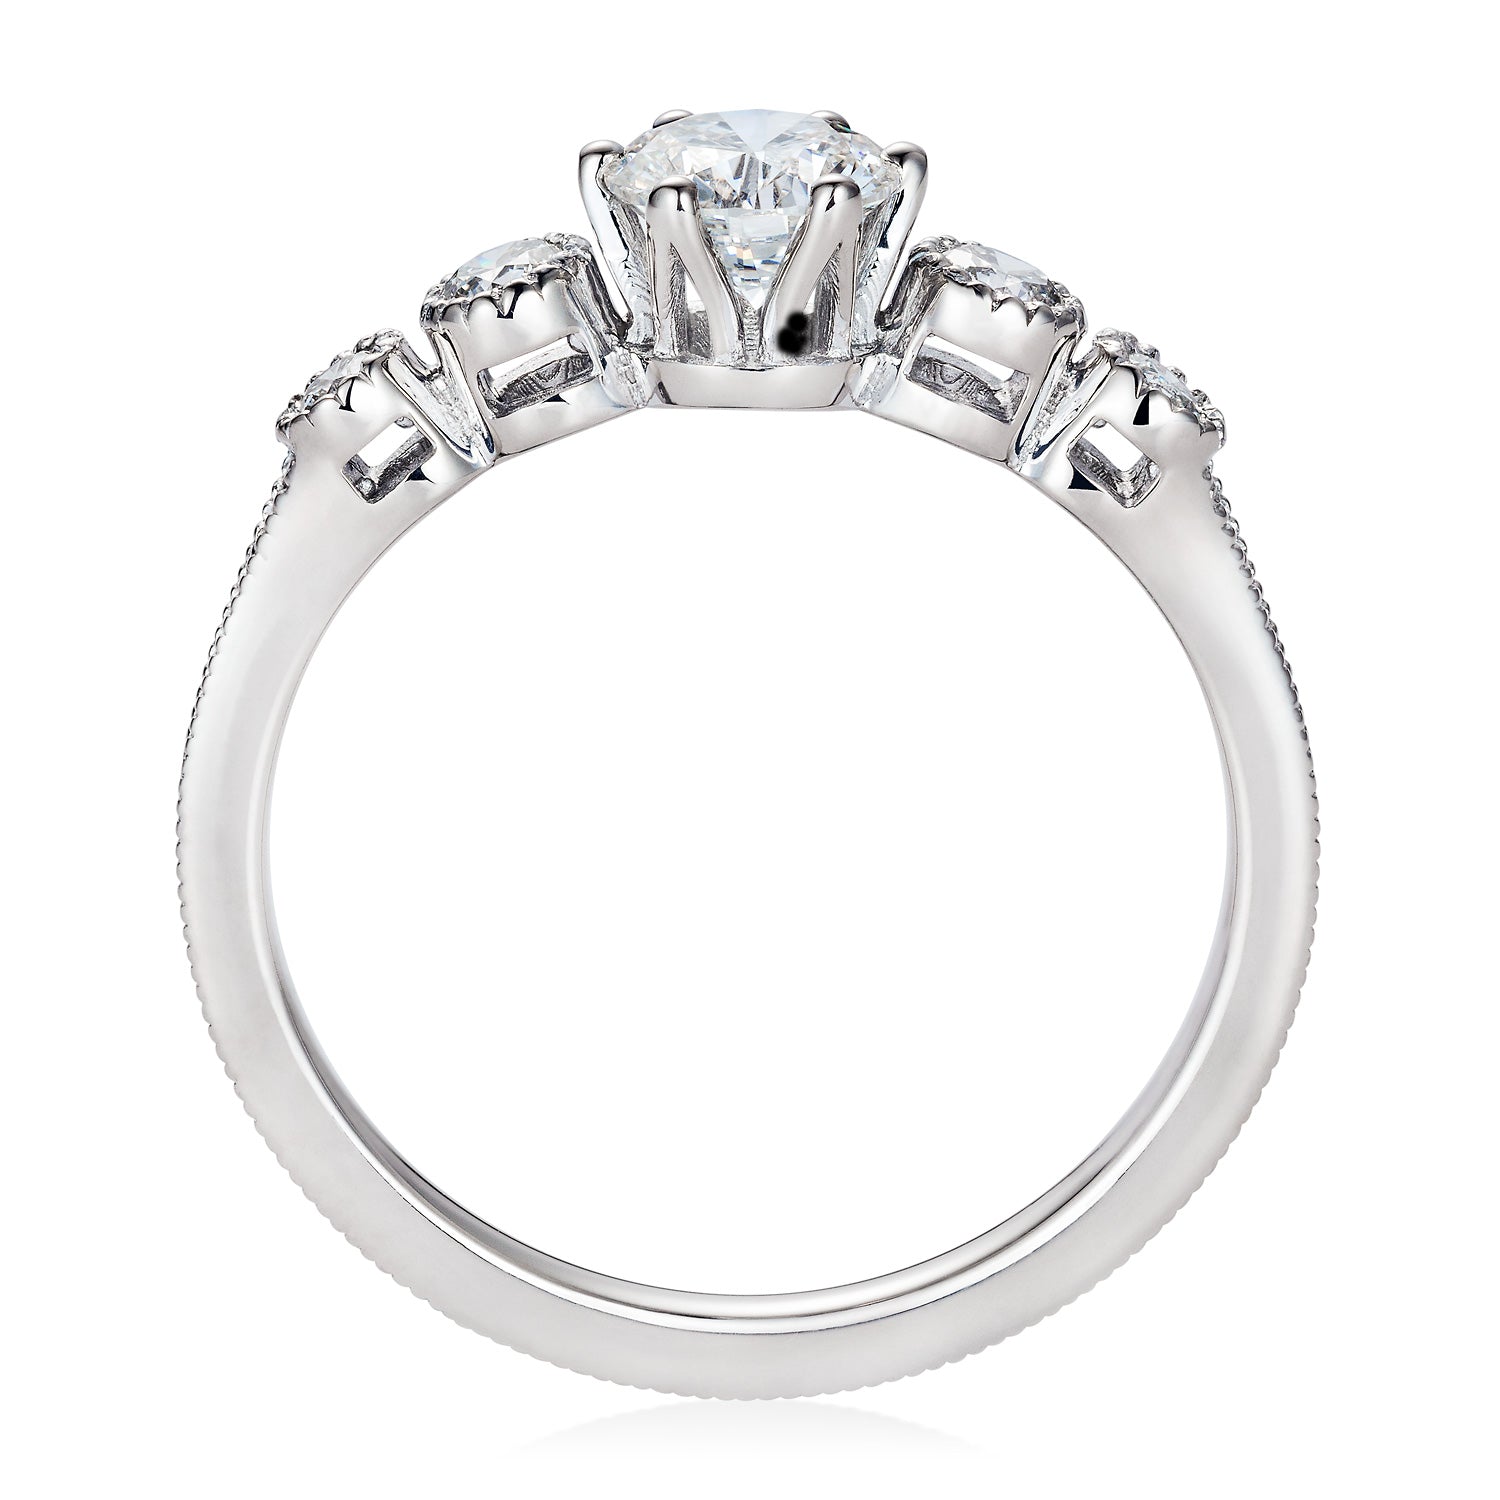 Queen Eleanor Engagement Ring by Yasmin Everley